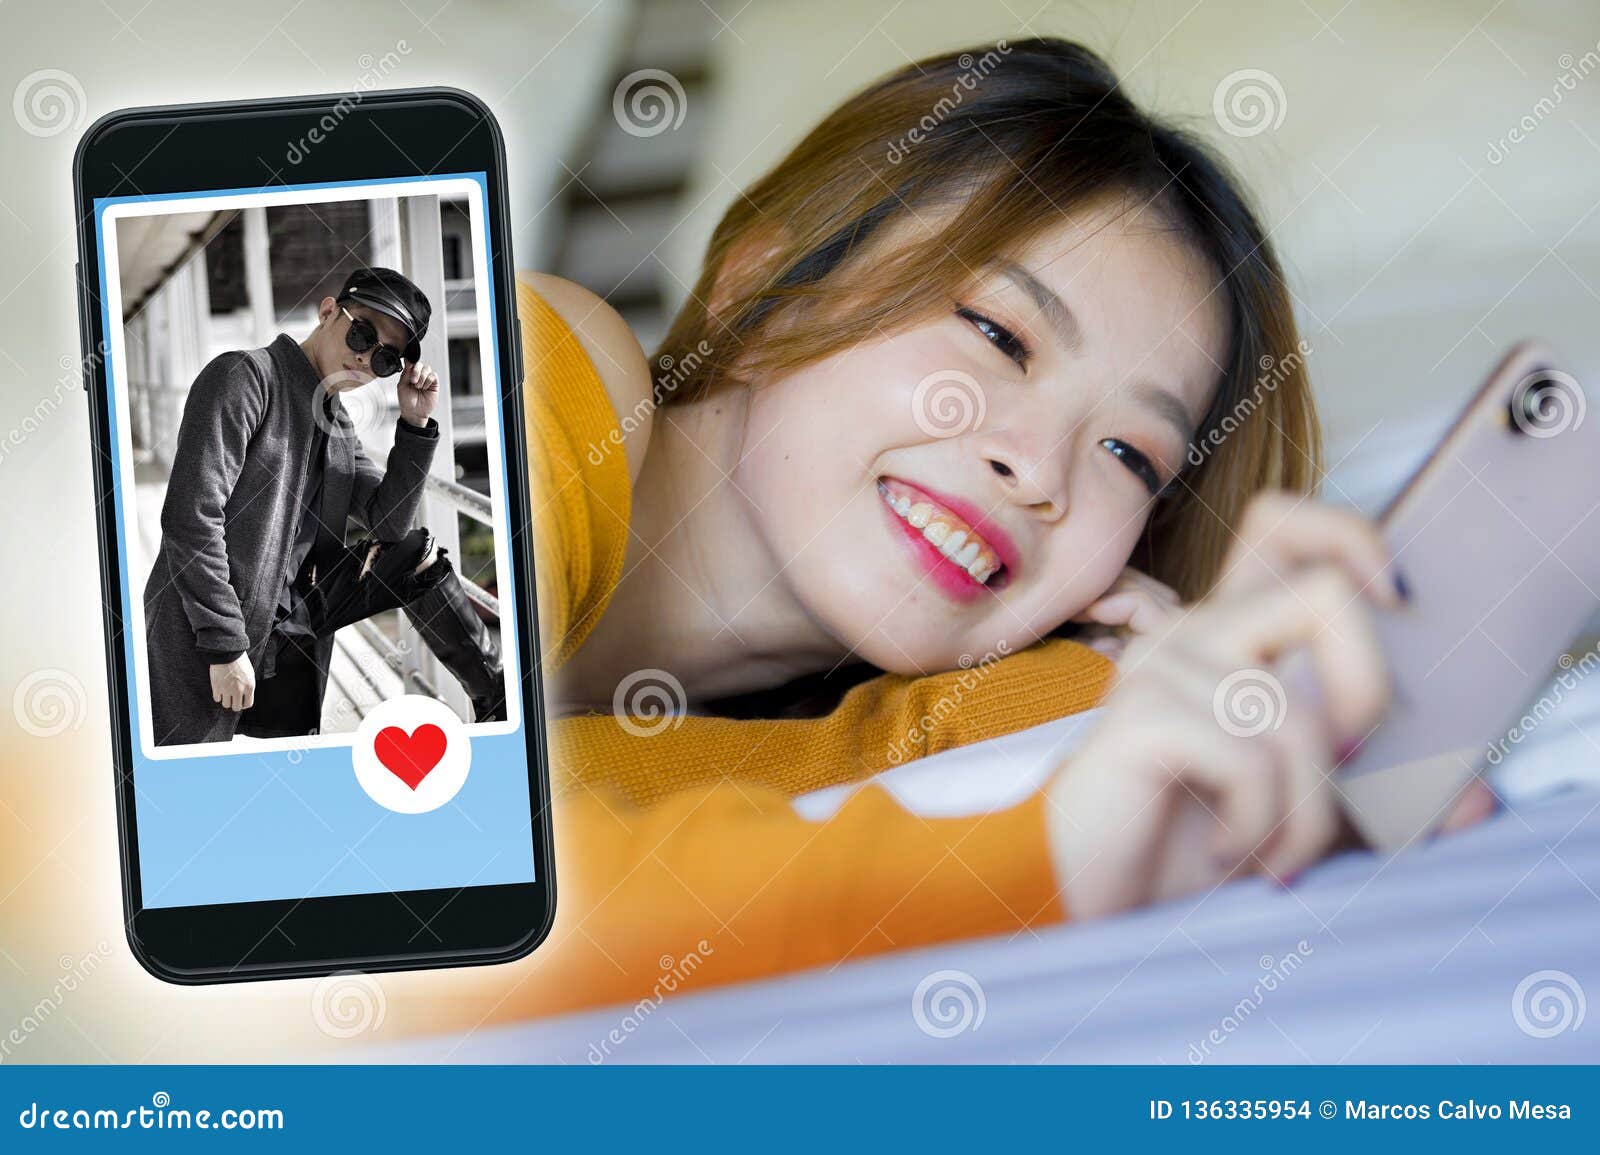 Video Chat Dating Site - Dating & chat online